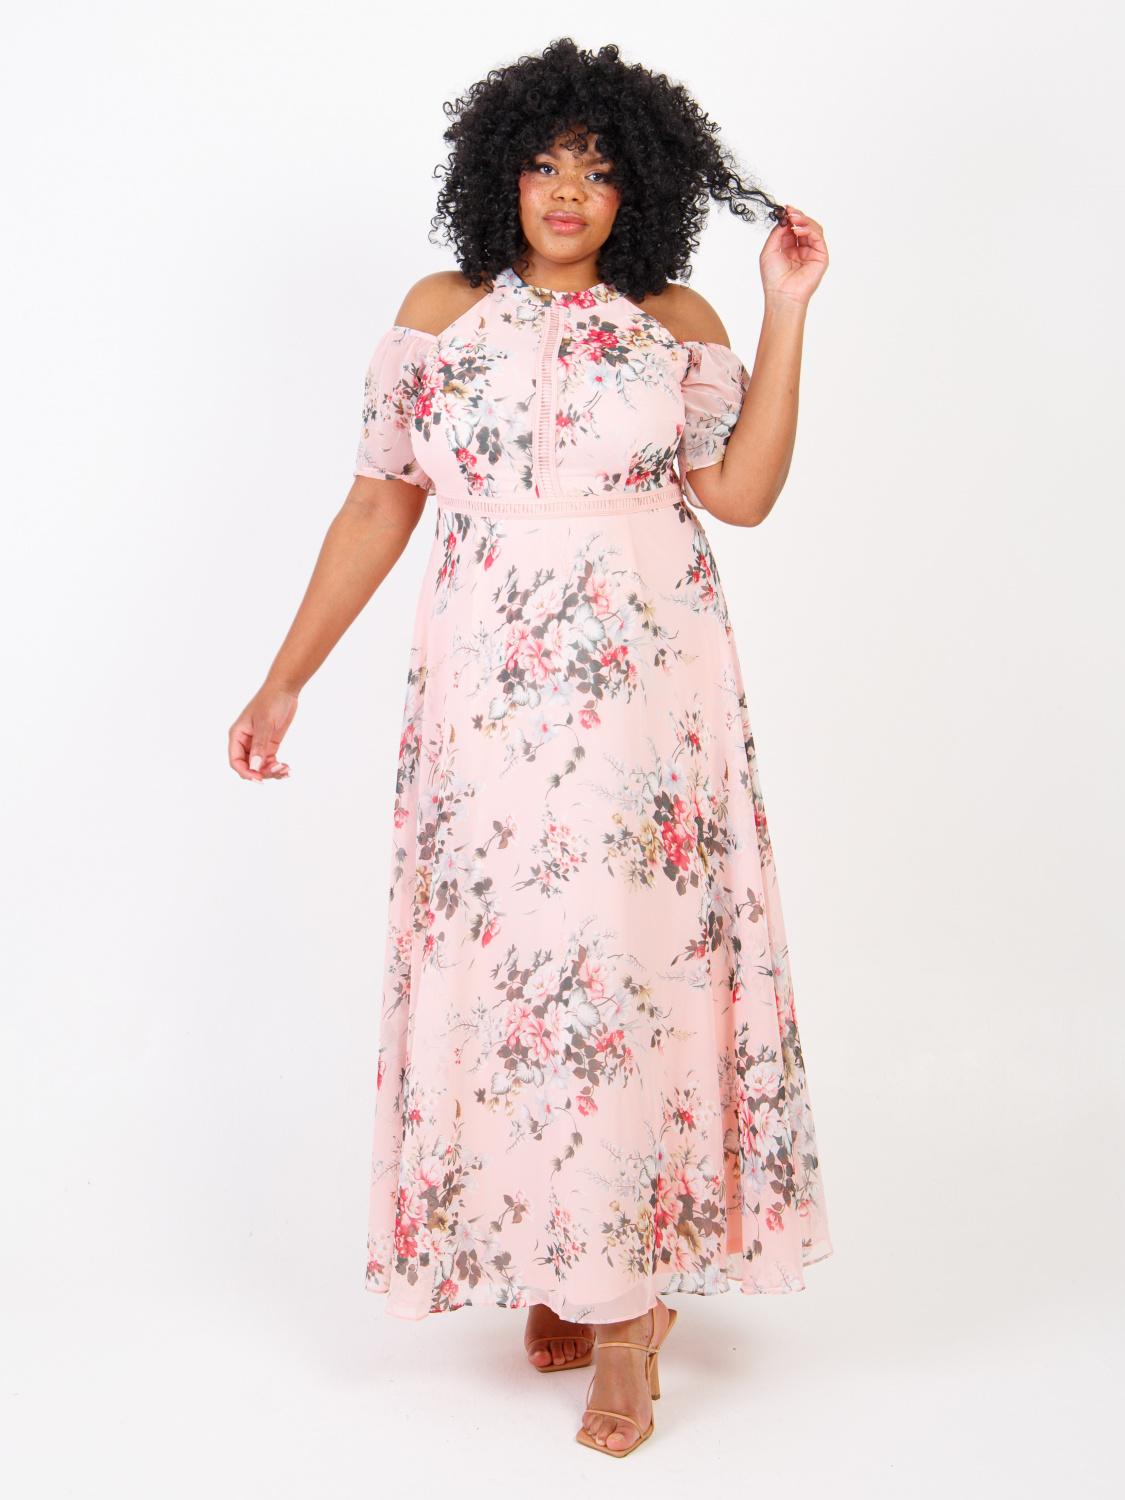 25 Plus Size Mother of the Groom Outfits & Dresses 2021 - hitched